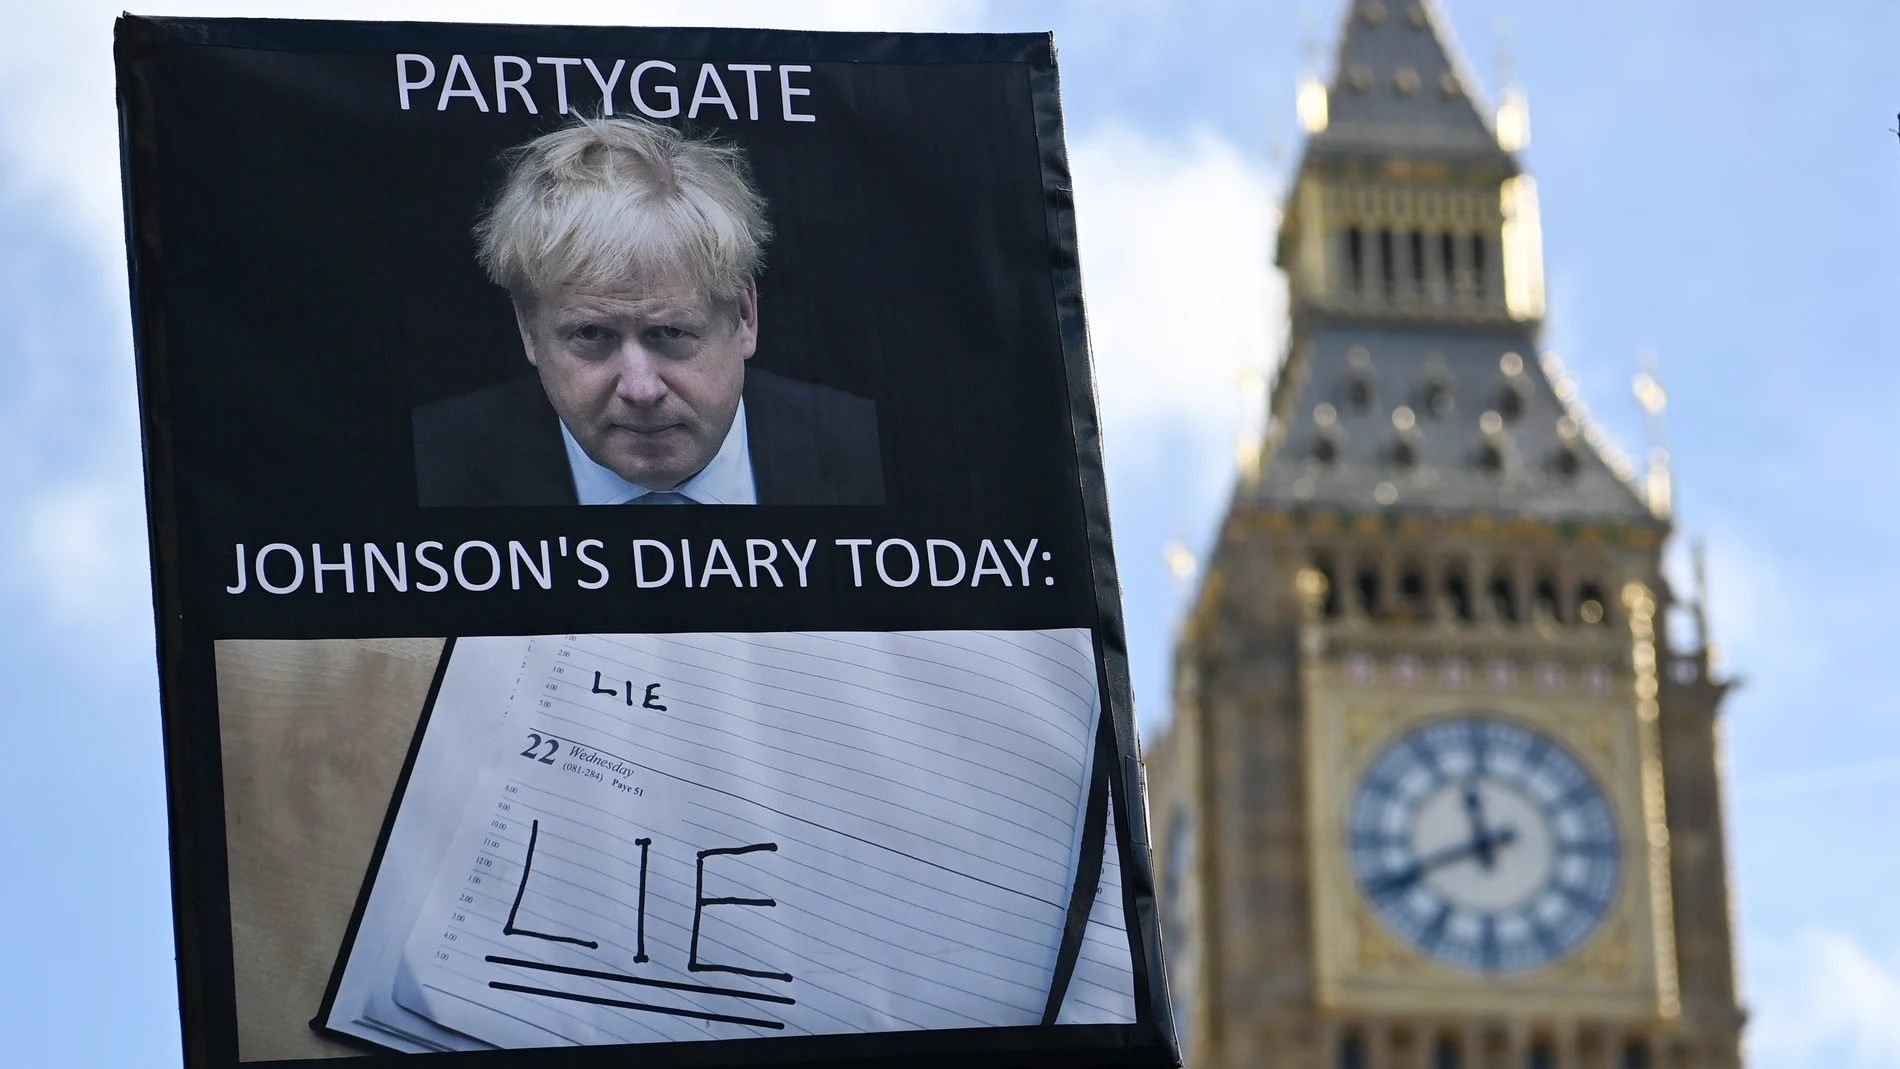 London (United Kingdom), 22/03/2023.- A protester demonstrates against former British Prime Minister Boris Johnson outside parliament in London, Britain, 22 March 2023. Johnson is set to give evidence to MPs who are investigating accusations that he misled parliament over Partygate after breaching covid rules in 2020. (Protestas, Reino Unido, Estados Unidos, Londres) EFE/EPA/ANDY RAIN
